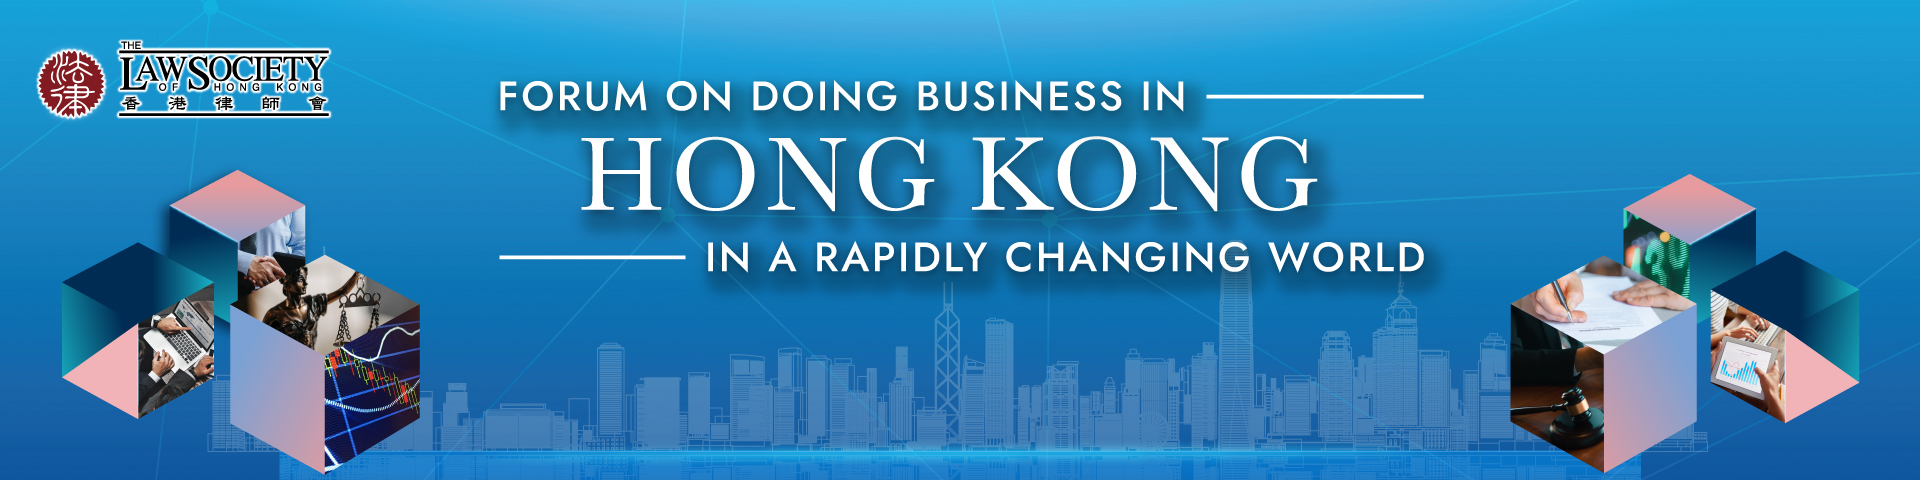 Forum on “Doing Business in Hong Kong in a Rapidly Changing World”